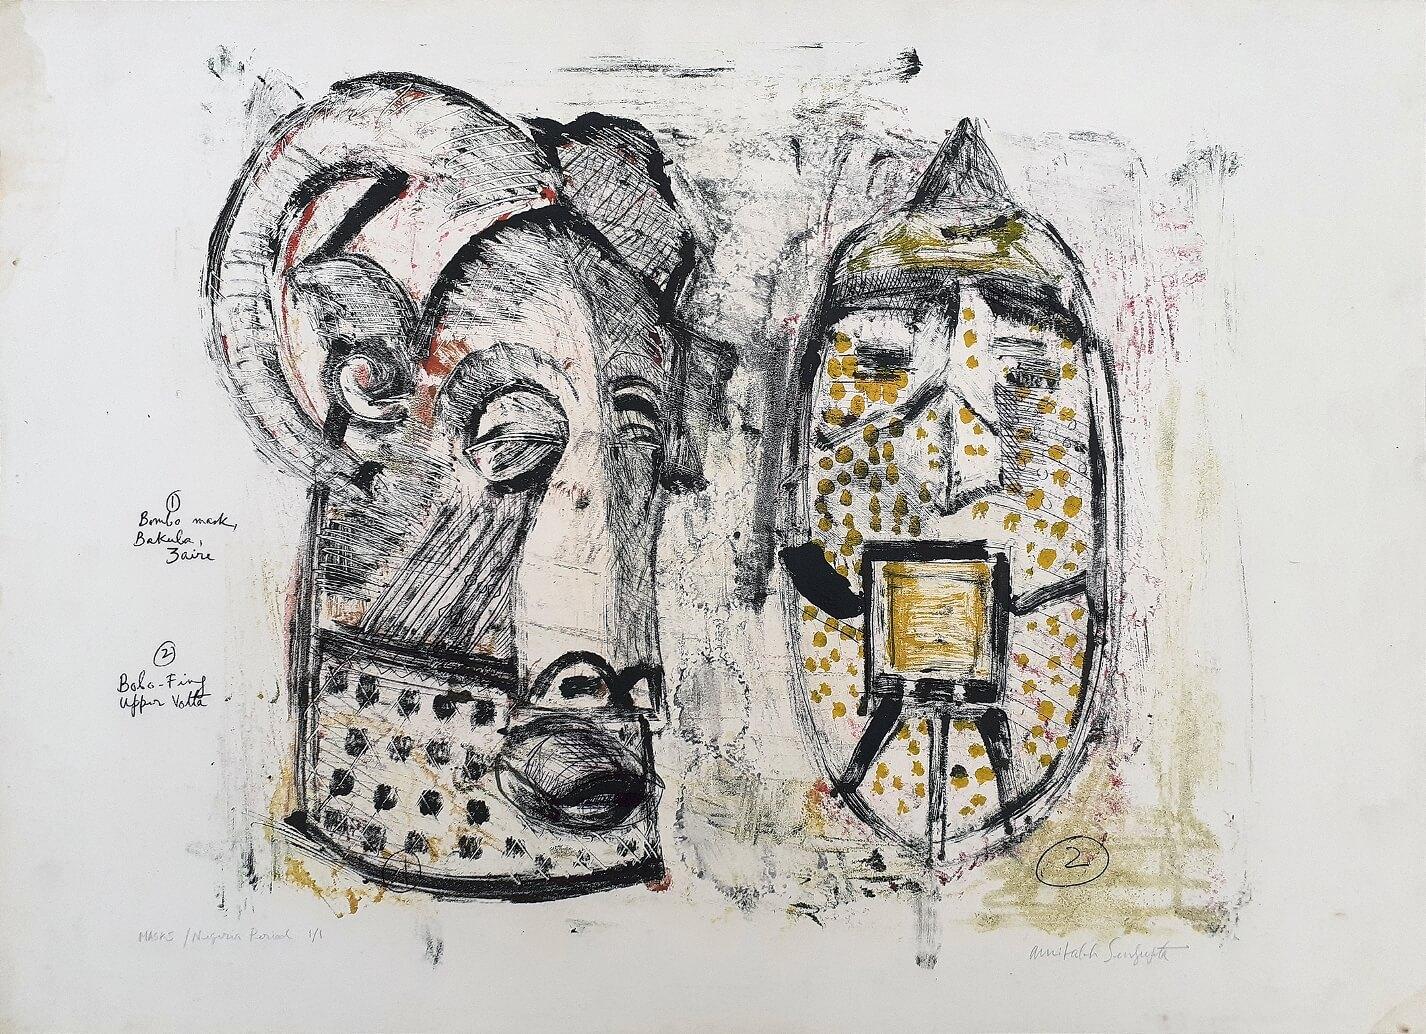 Amitabh Sengupta Abstract Painting - Masks Nigeria Period, Frottage on Paper, Edition 1/1 by Modern Artist "In Stock"